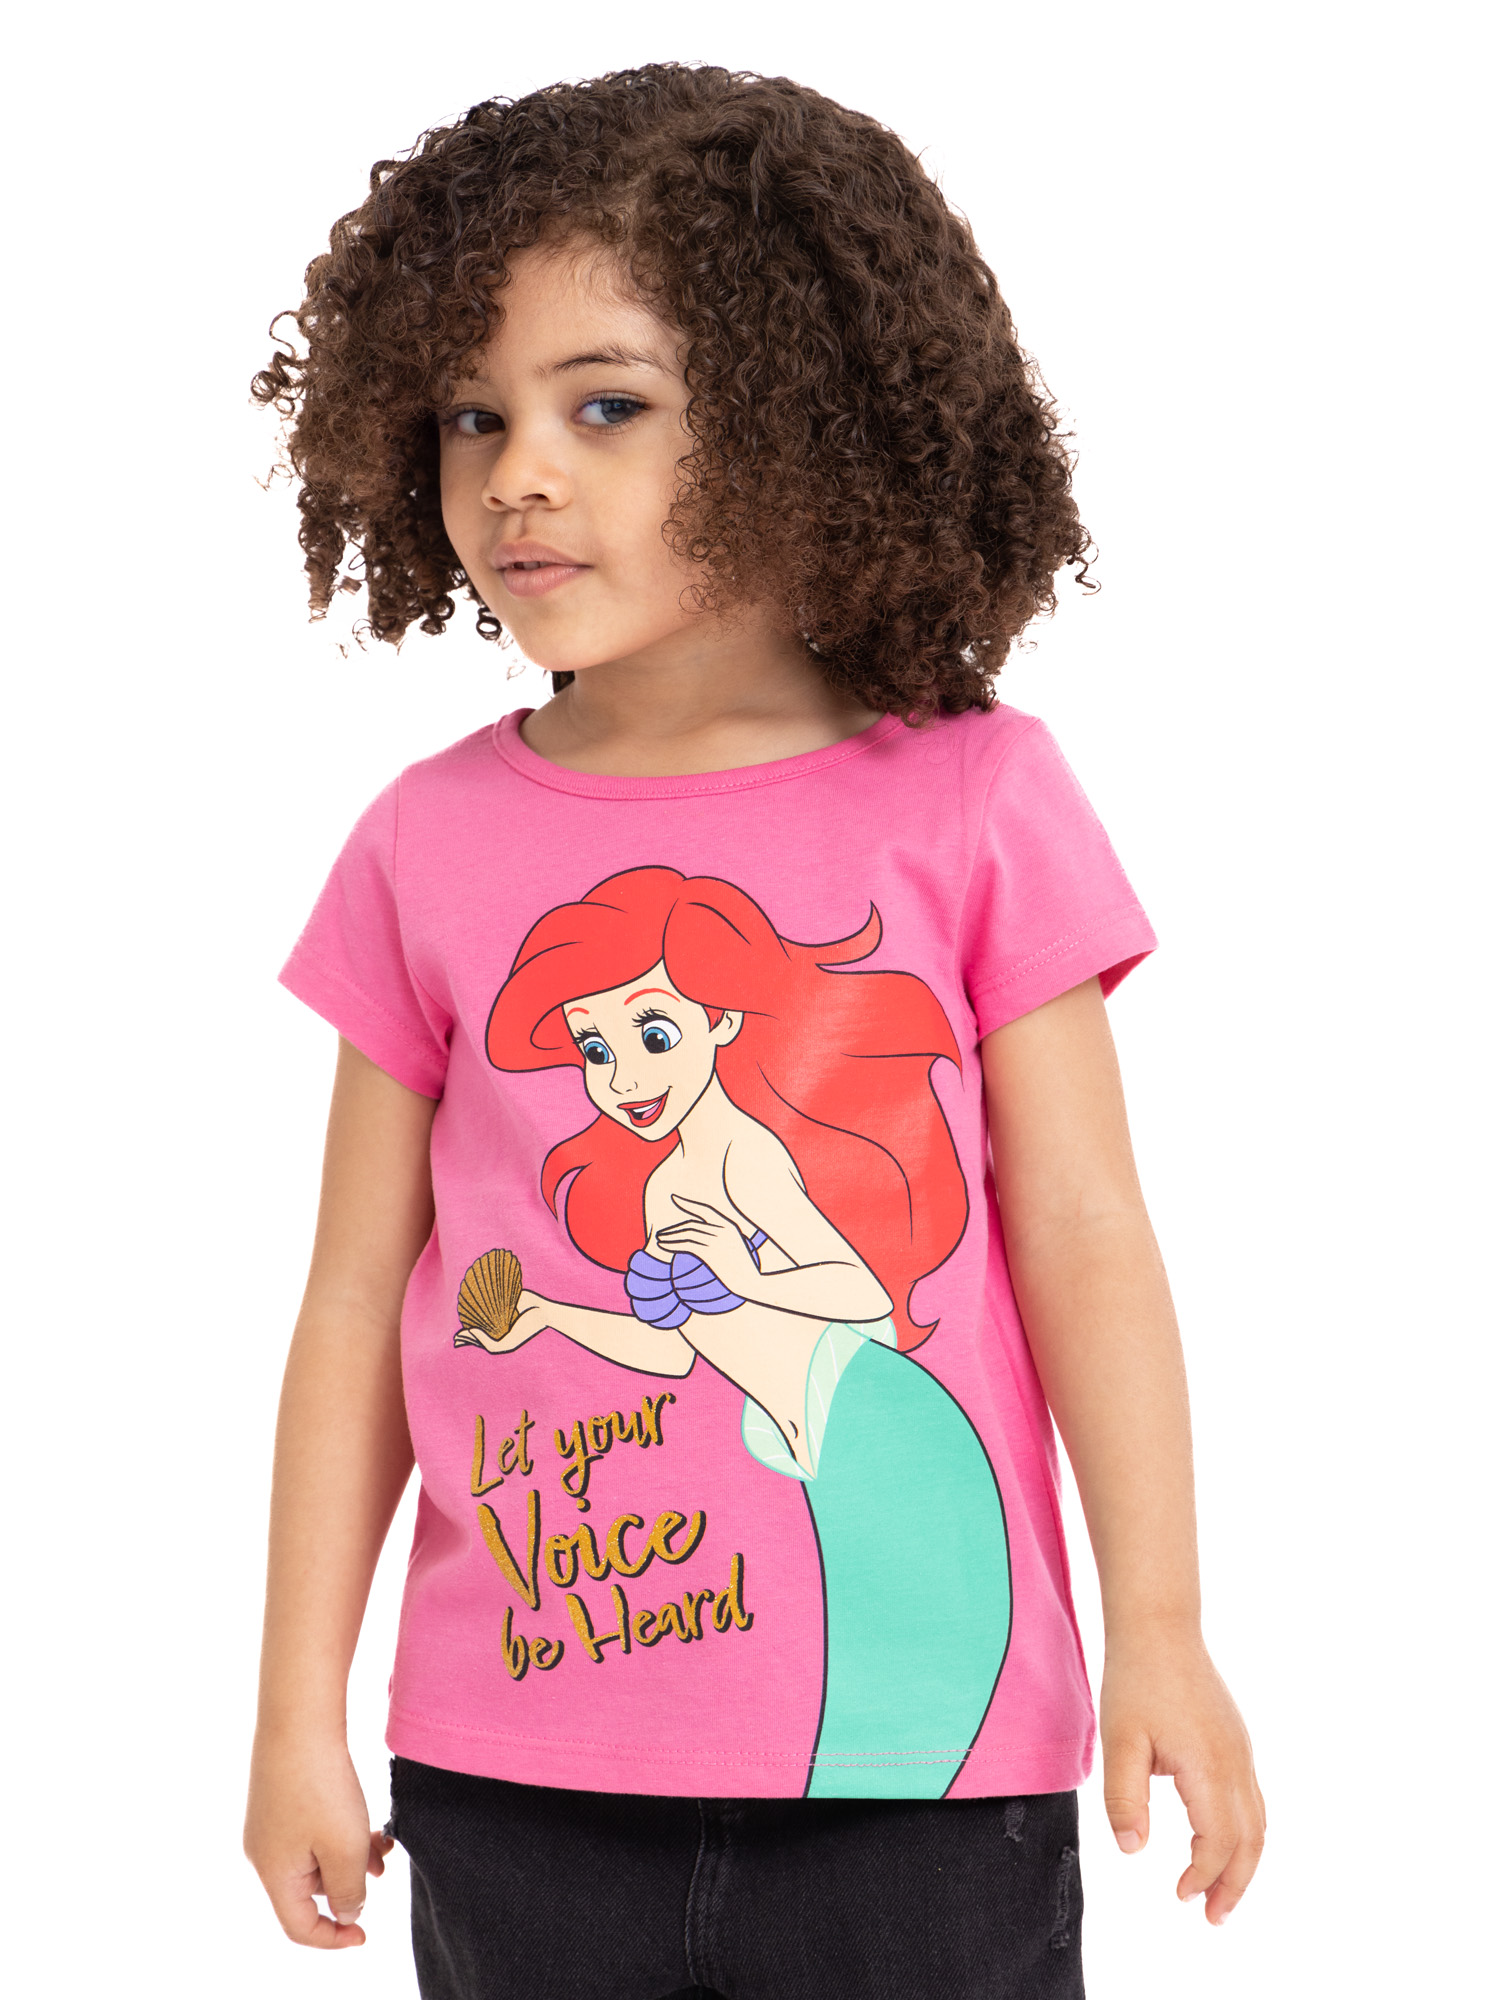 Disney Princess Toddler Girls Fashion T-Shirts with Short Sleeves, 4-Pack, Sizes 2T-5T - image 4 of 9